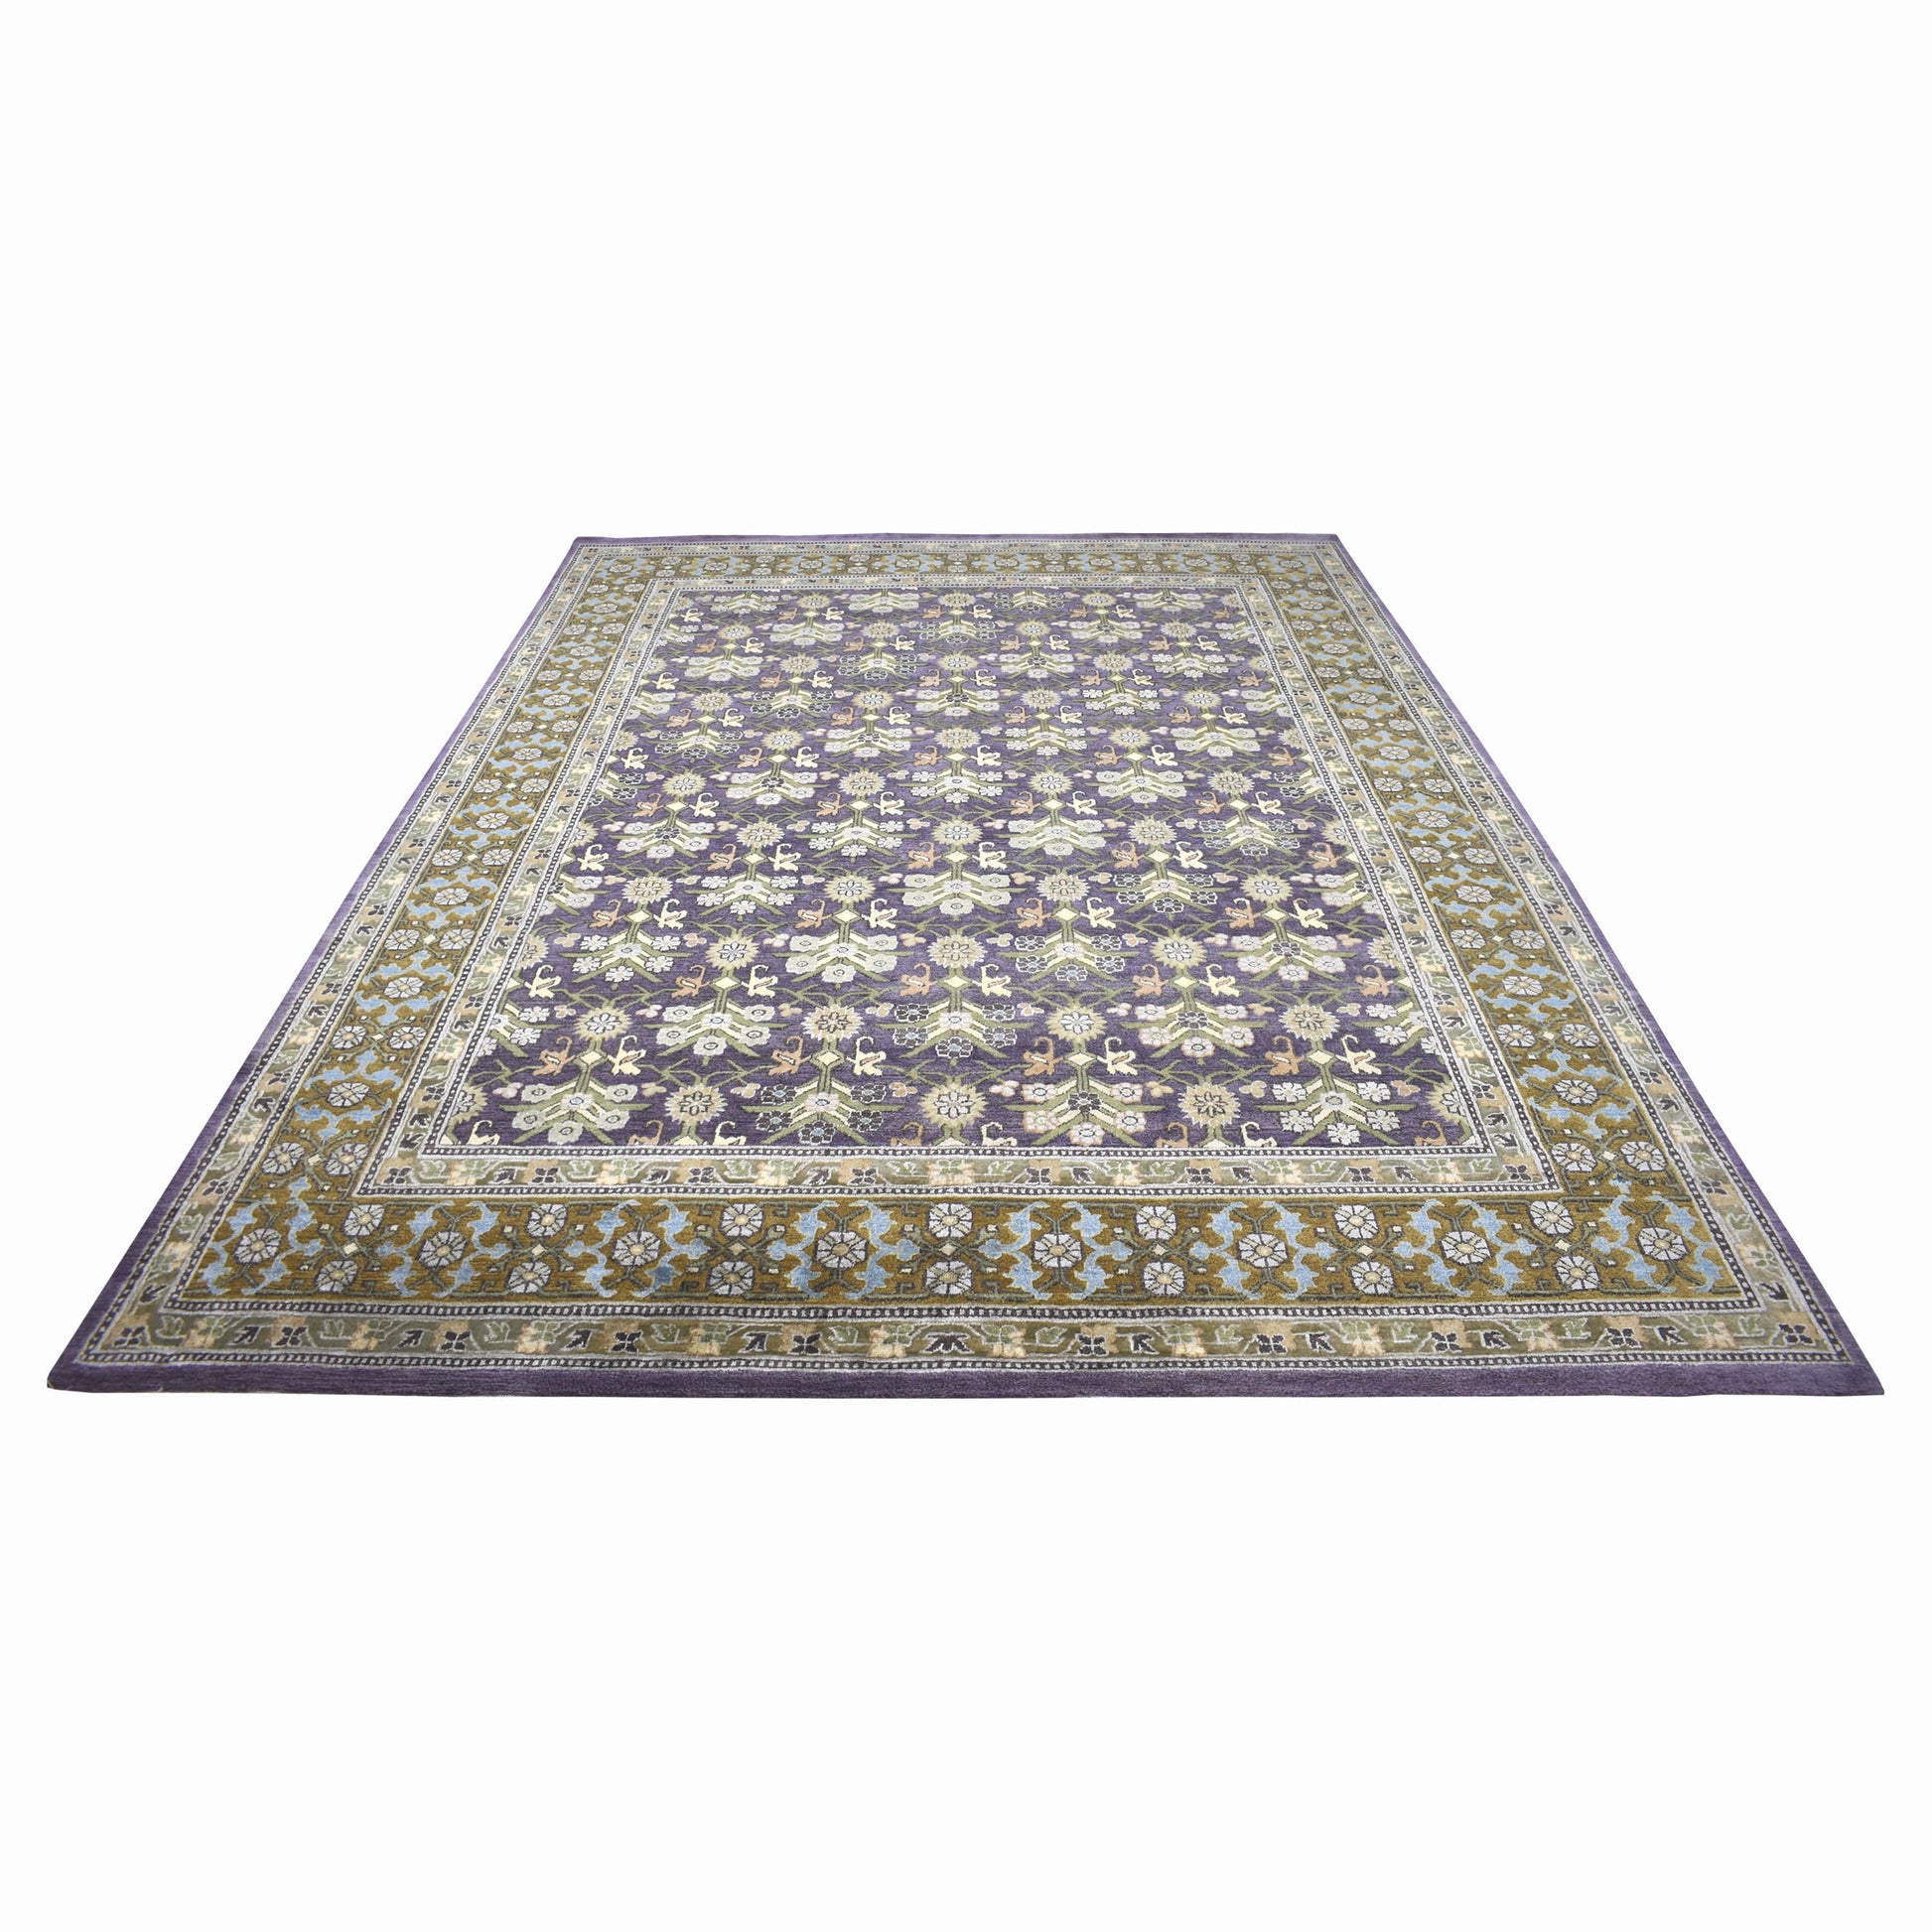 Get trendy with Garden Samarkand Lavender, Camel and Multy Traditional Silk and Wool Handknotted Area Rug - Traditional Rugs available at Jaipur Oriental Rugs. Grab yours for $5740.00 today!